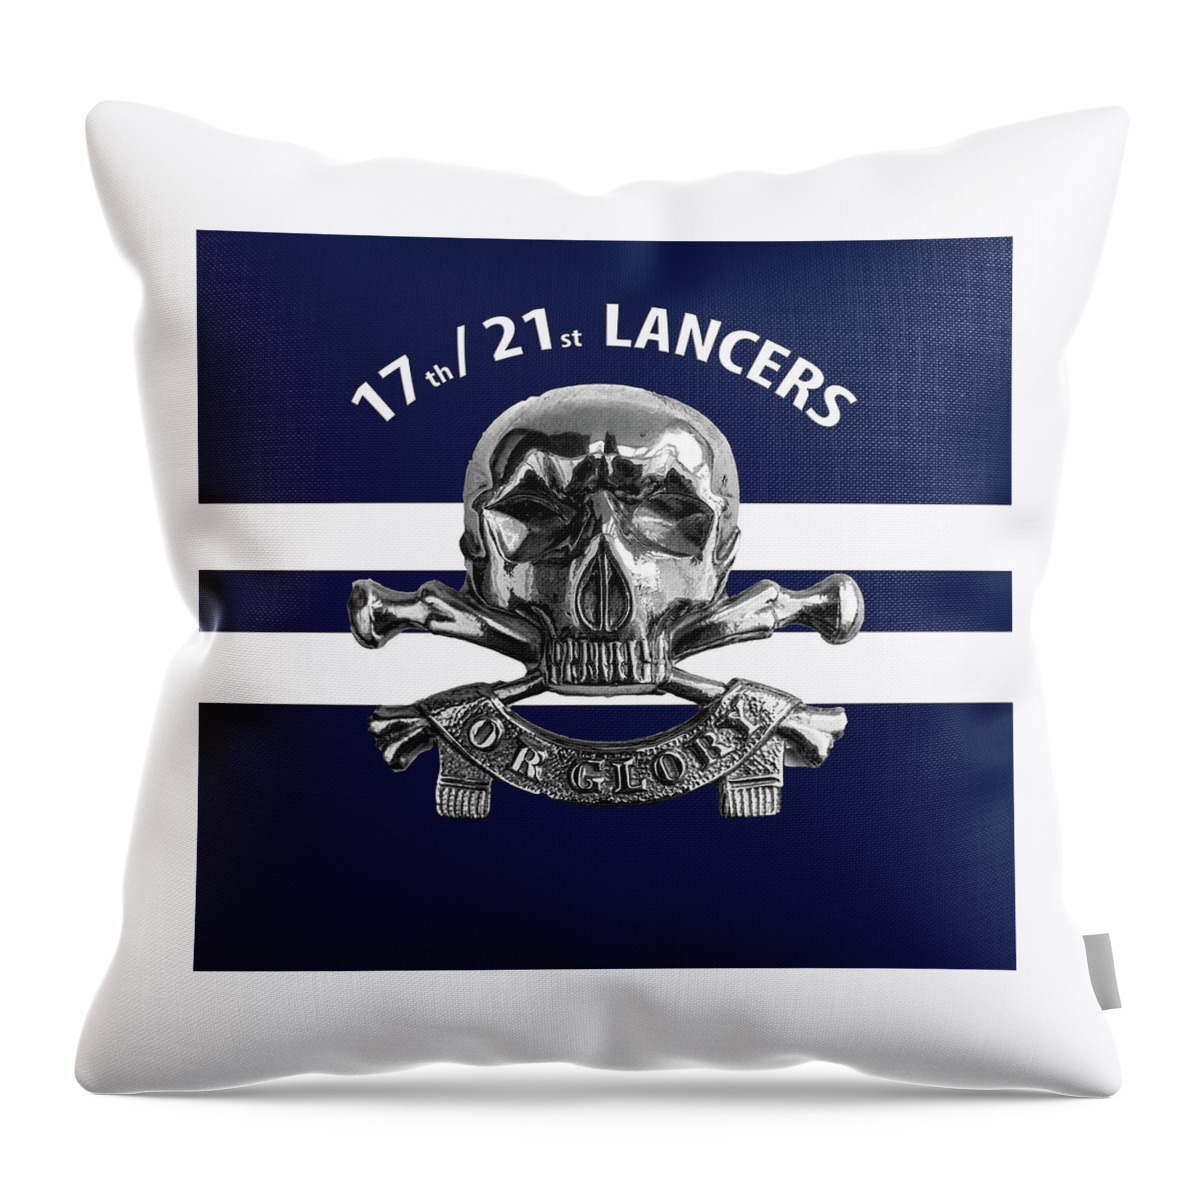 17/21 Lancers Throw Pillow featuring the digital art 17th/21st LANCERS by Roy Pedersen